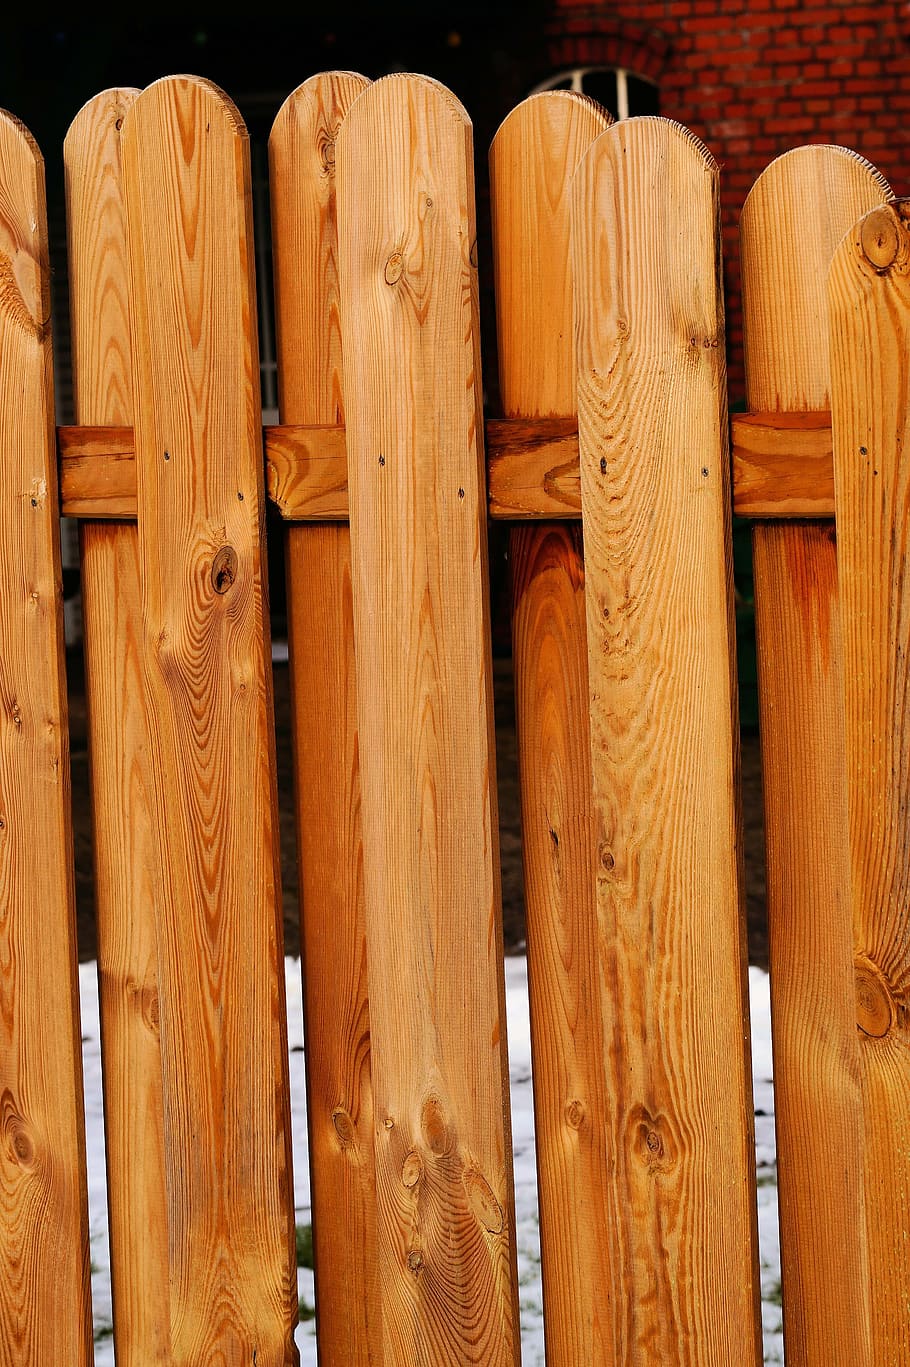 Hd Wallpaper Fence Wood Fence Limit Paling Demarcation Images, Photos, Reviews